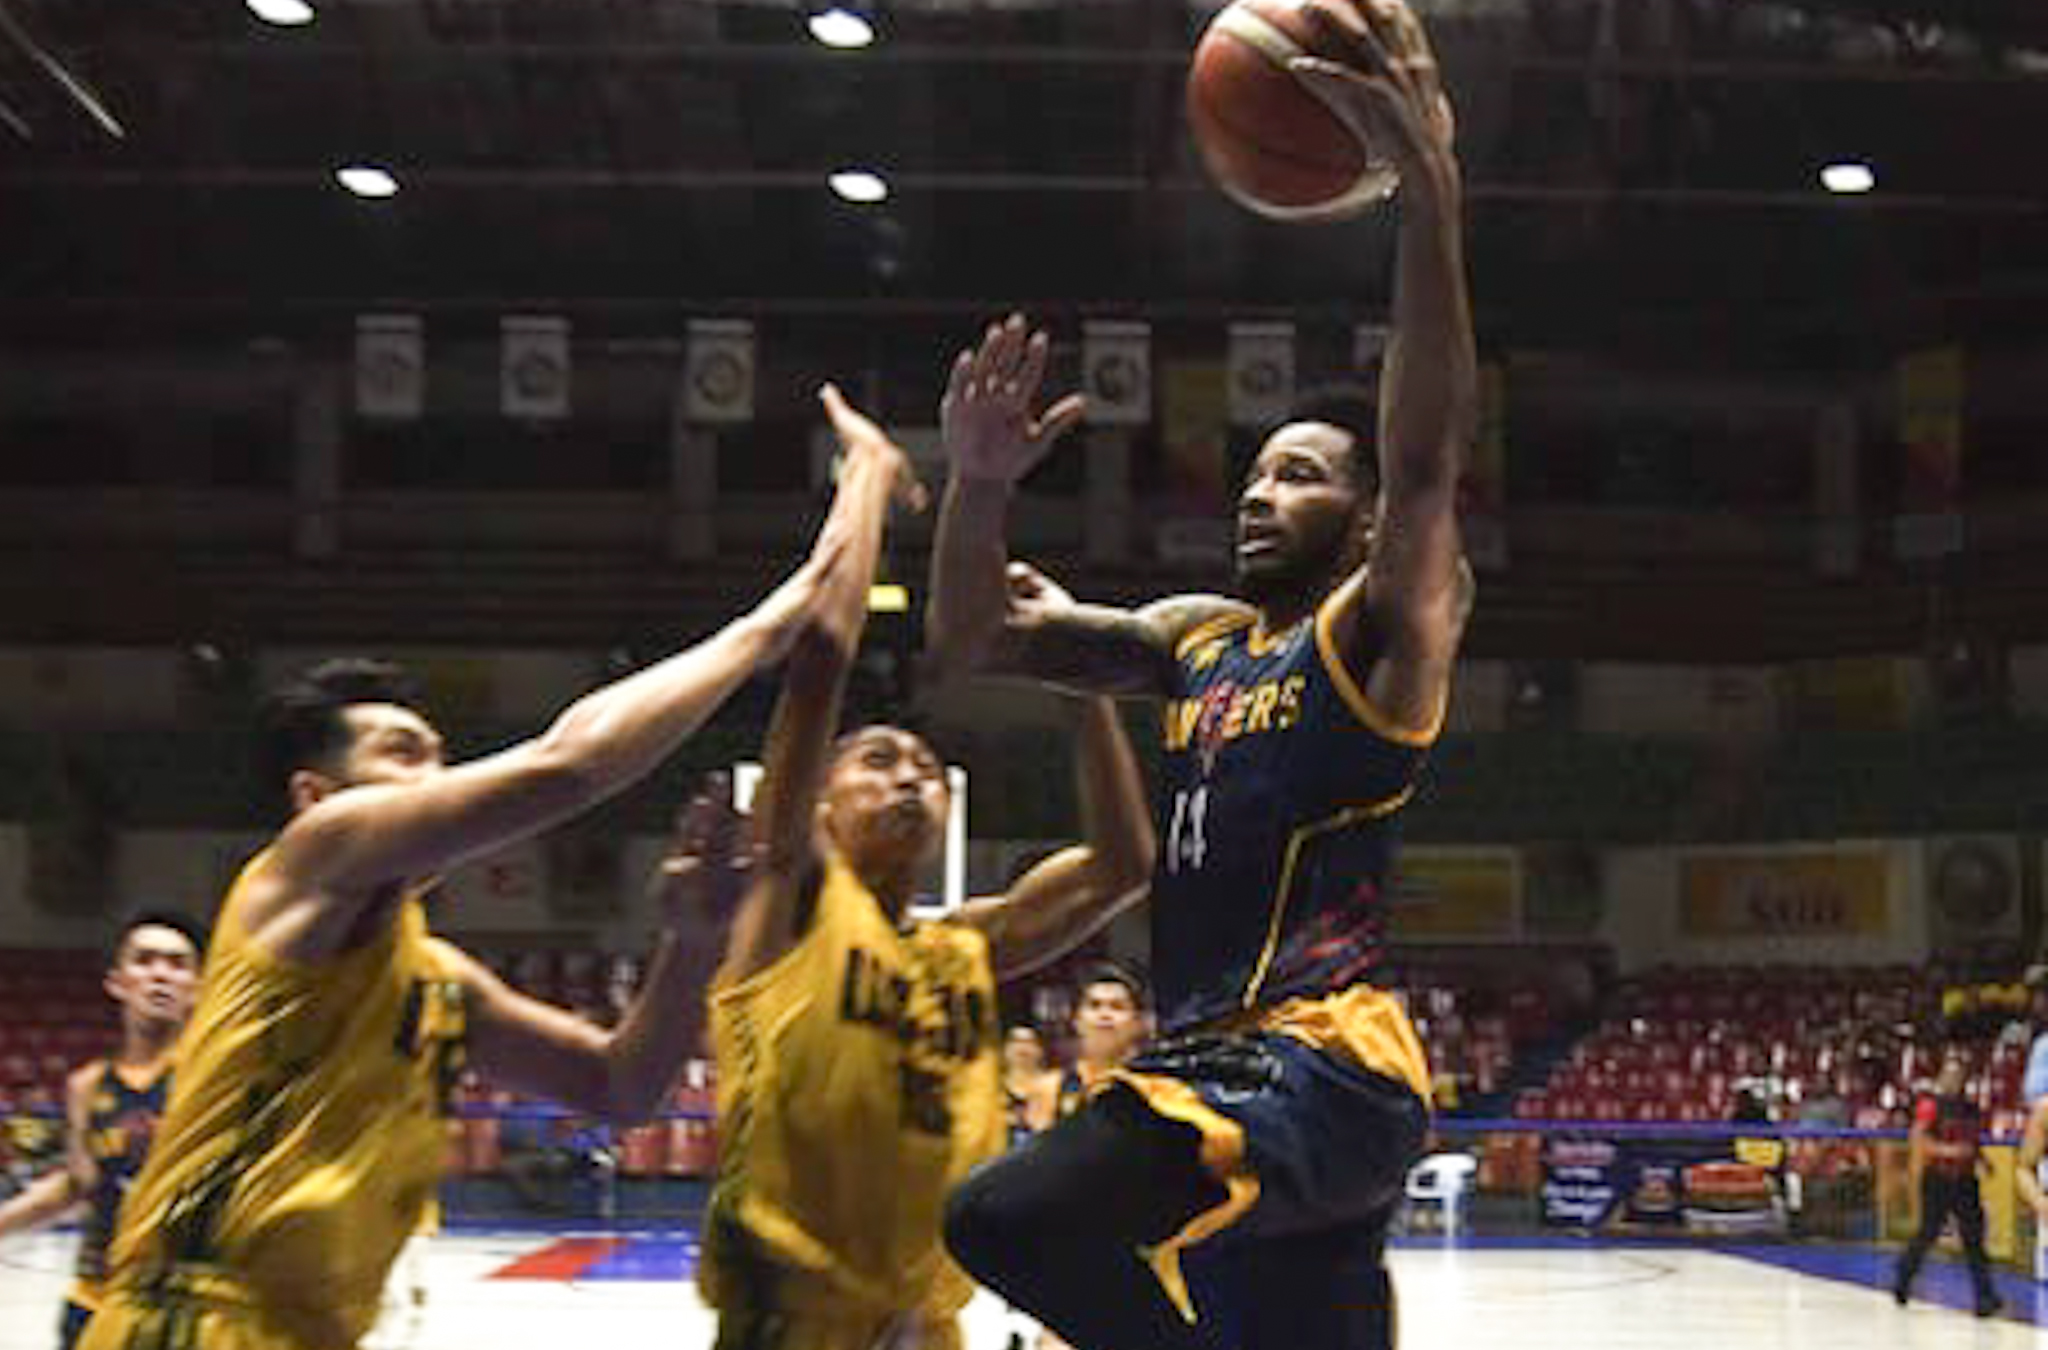 CIT-U shocks SWU-Phinma to secure first win